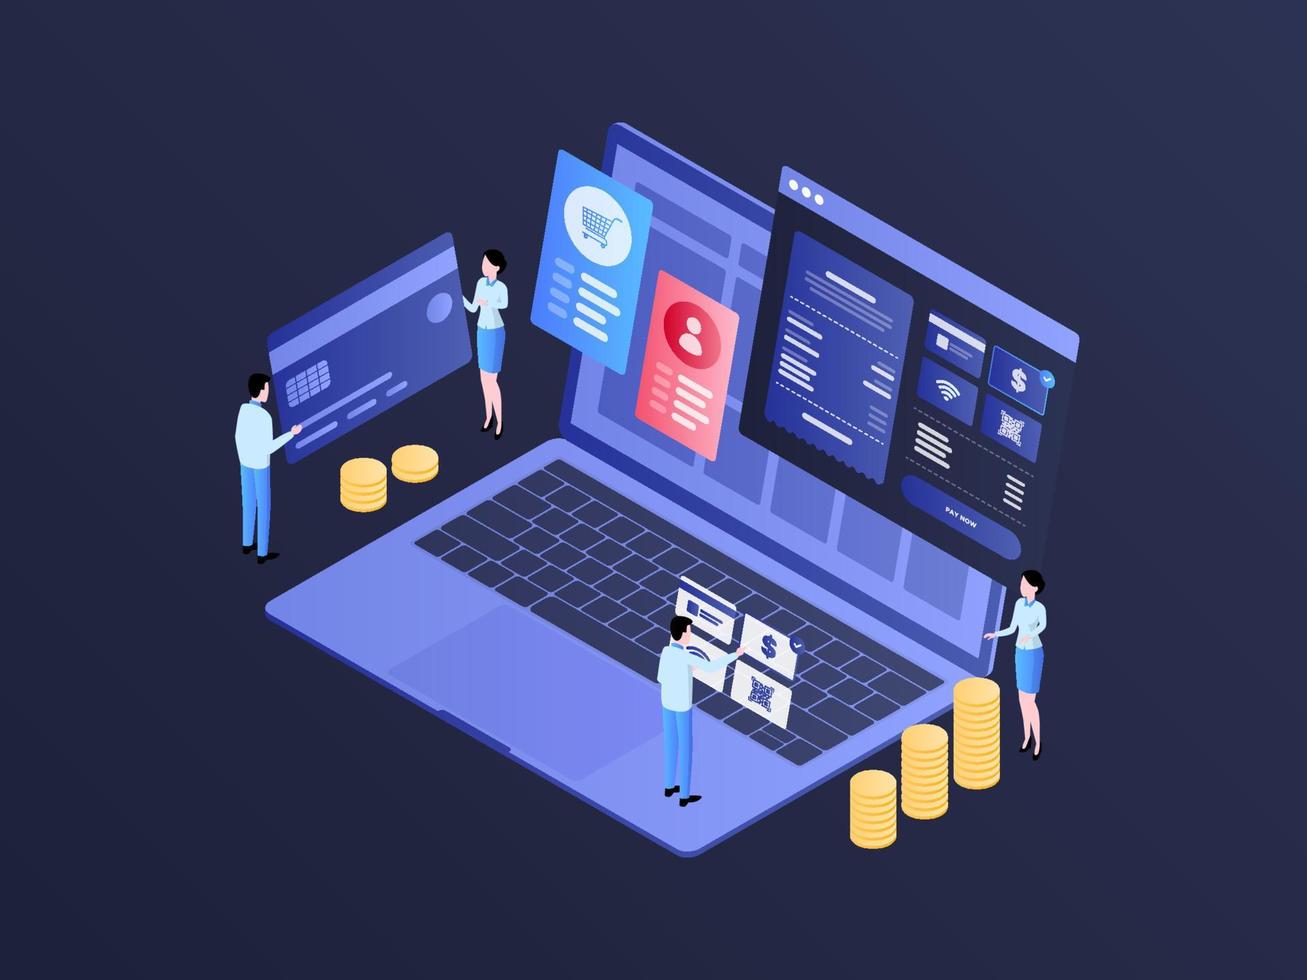 Desktop Payment Isometric Illustration Dark Gradient. Suitable for Mobile App, Website, Banner, Diagrams, Infographics, and Other Graphic Assets. vector